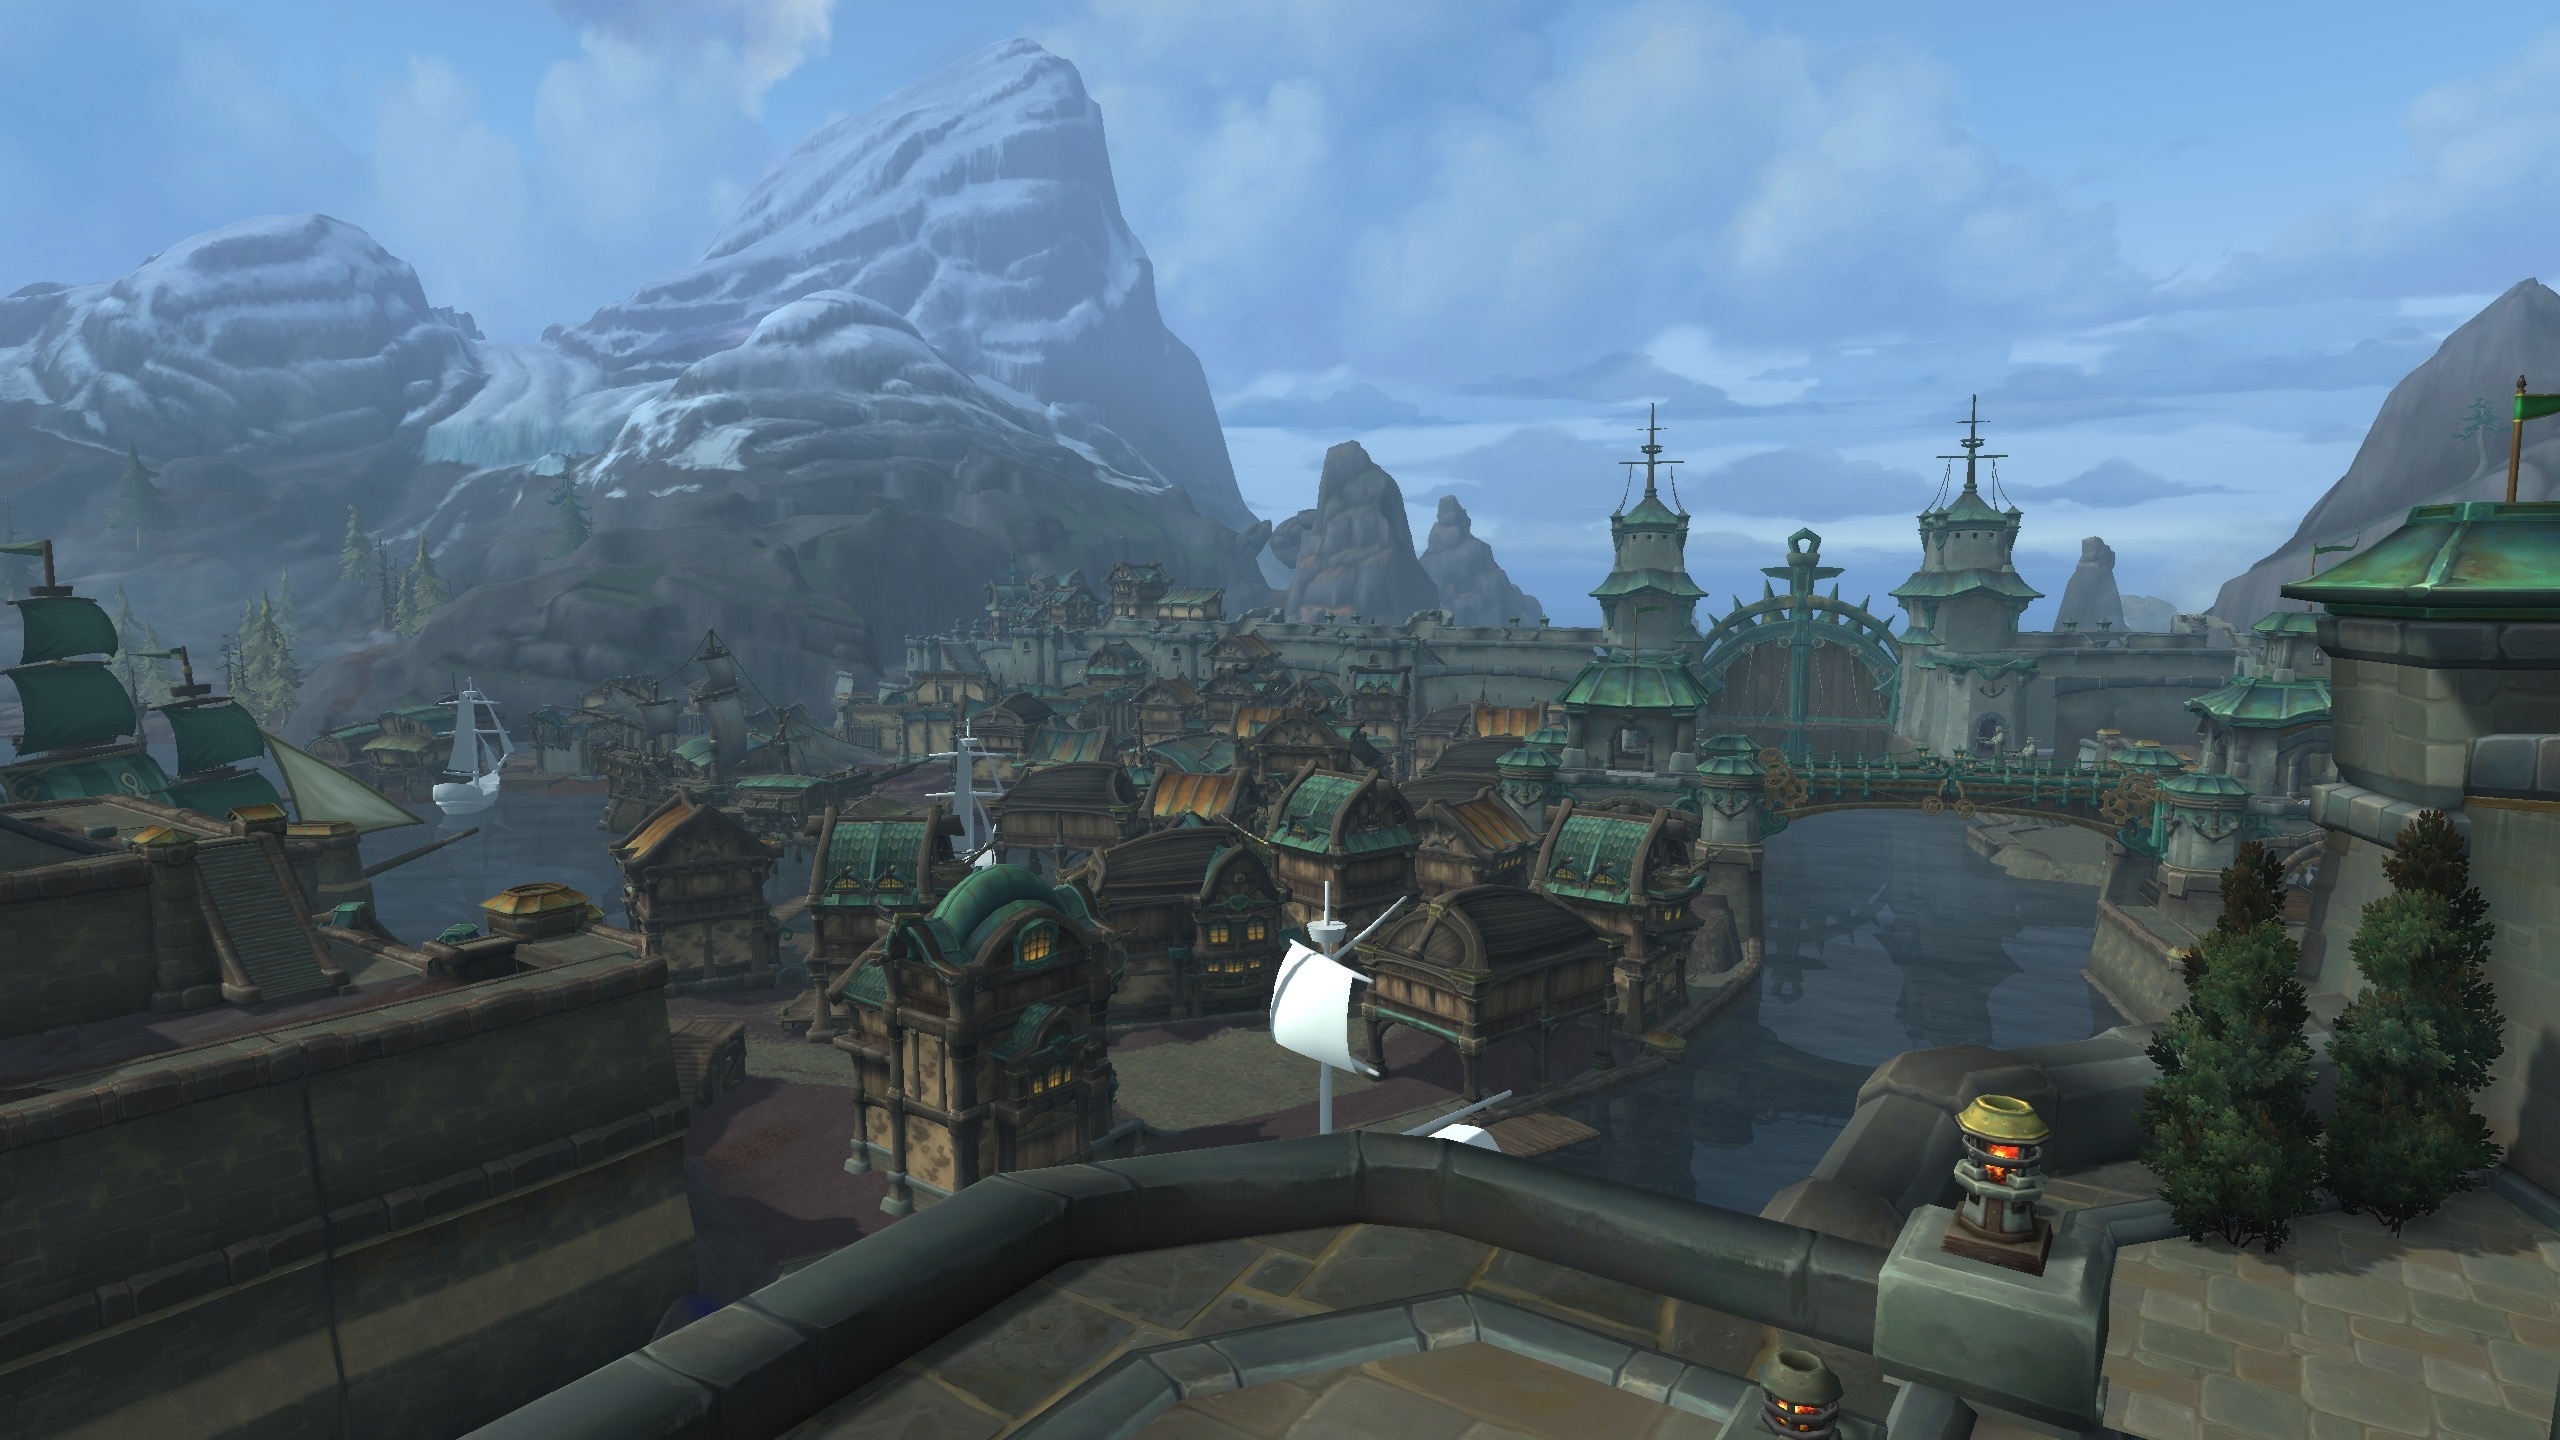 Early Look at Boralus, the Alliance Hub in Battle for Azeroth - Wowhead News